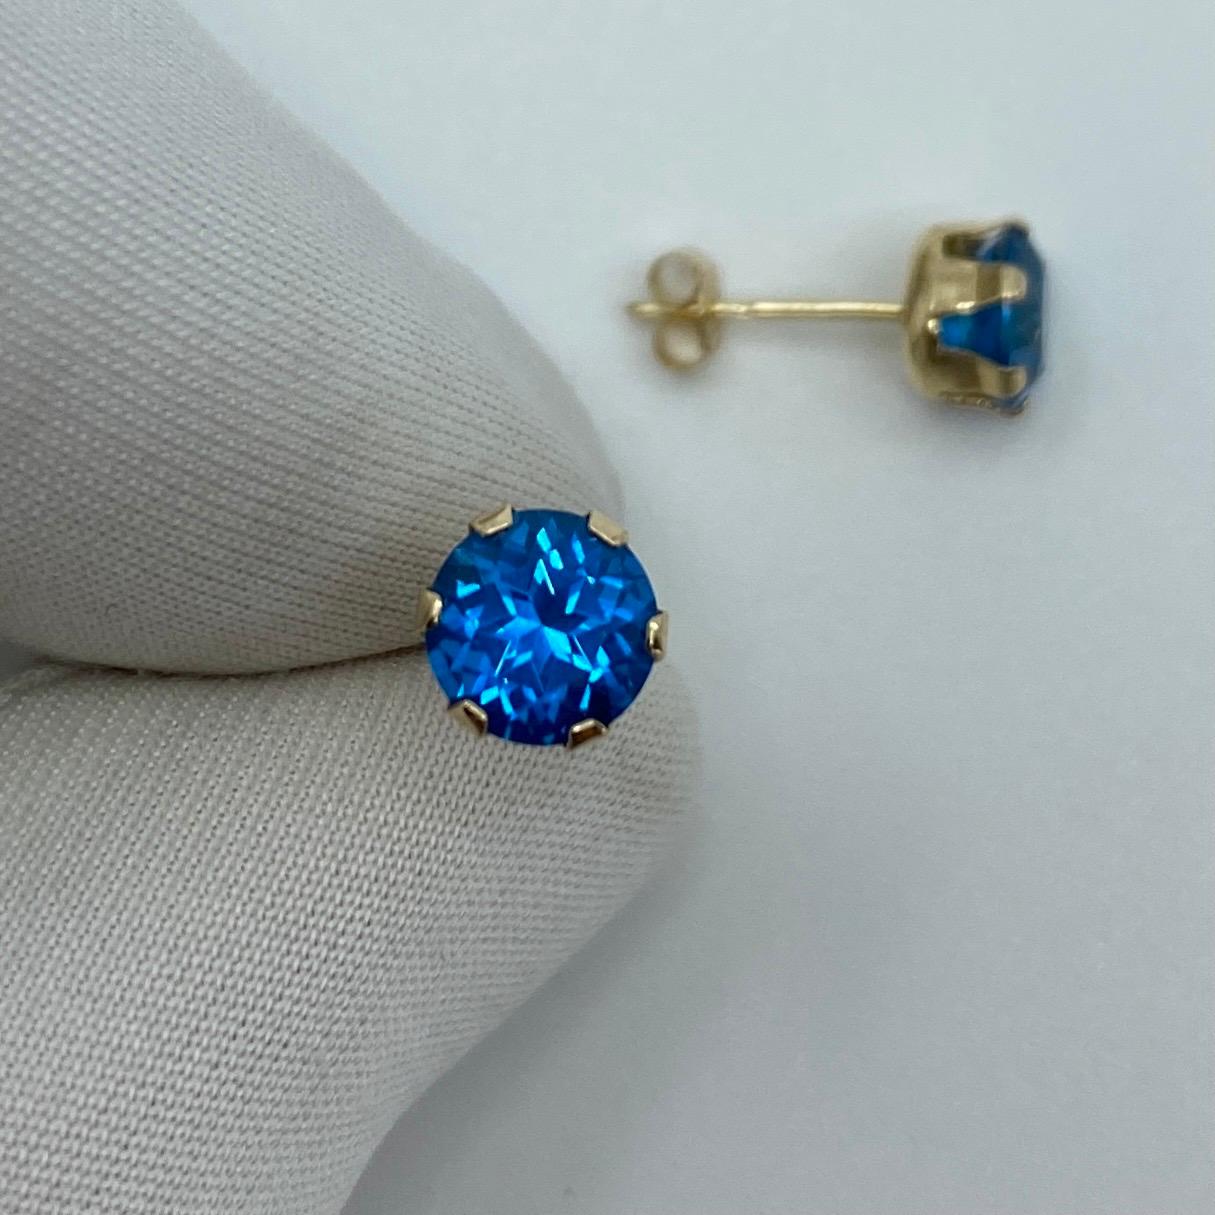 Natural Swiss Blue 2 Carat Topaz Yellow Gold Earring Studs.

Beautiful 6mm matching pair of round topaz with vivid Swiss blue colour, excellent clarity and an excellent round brilliant cut.

Set in lightweight 9k yellow gold suds with butterfly